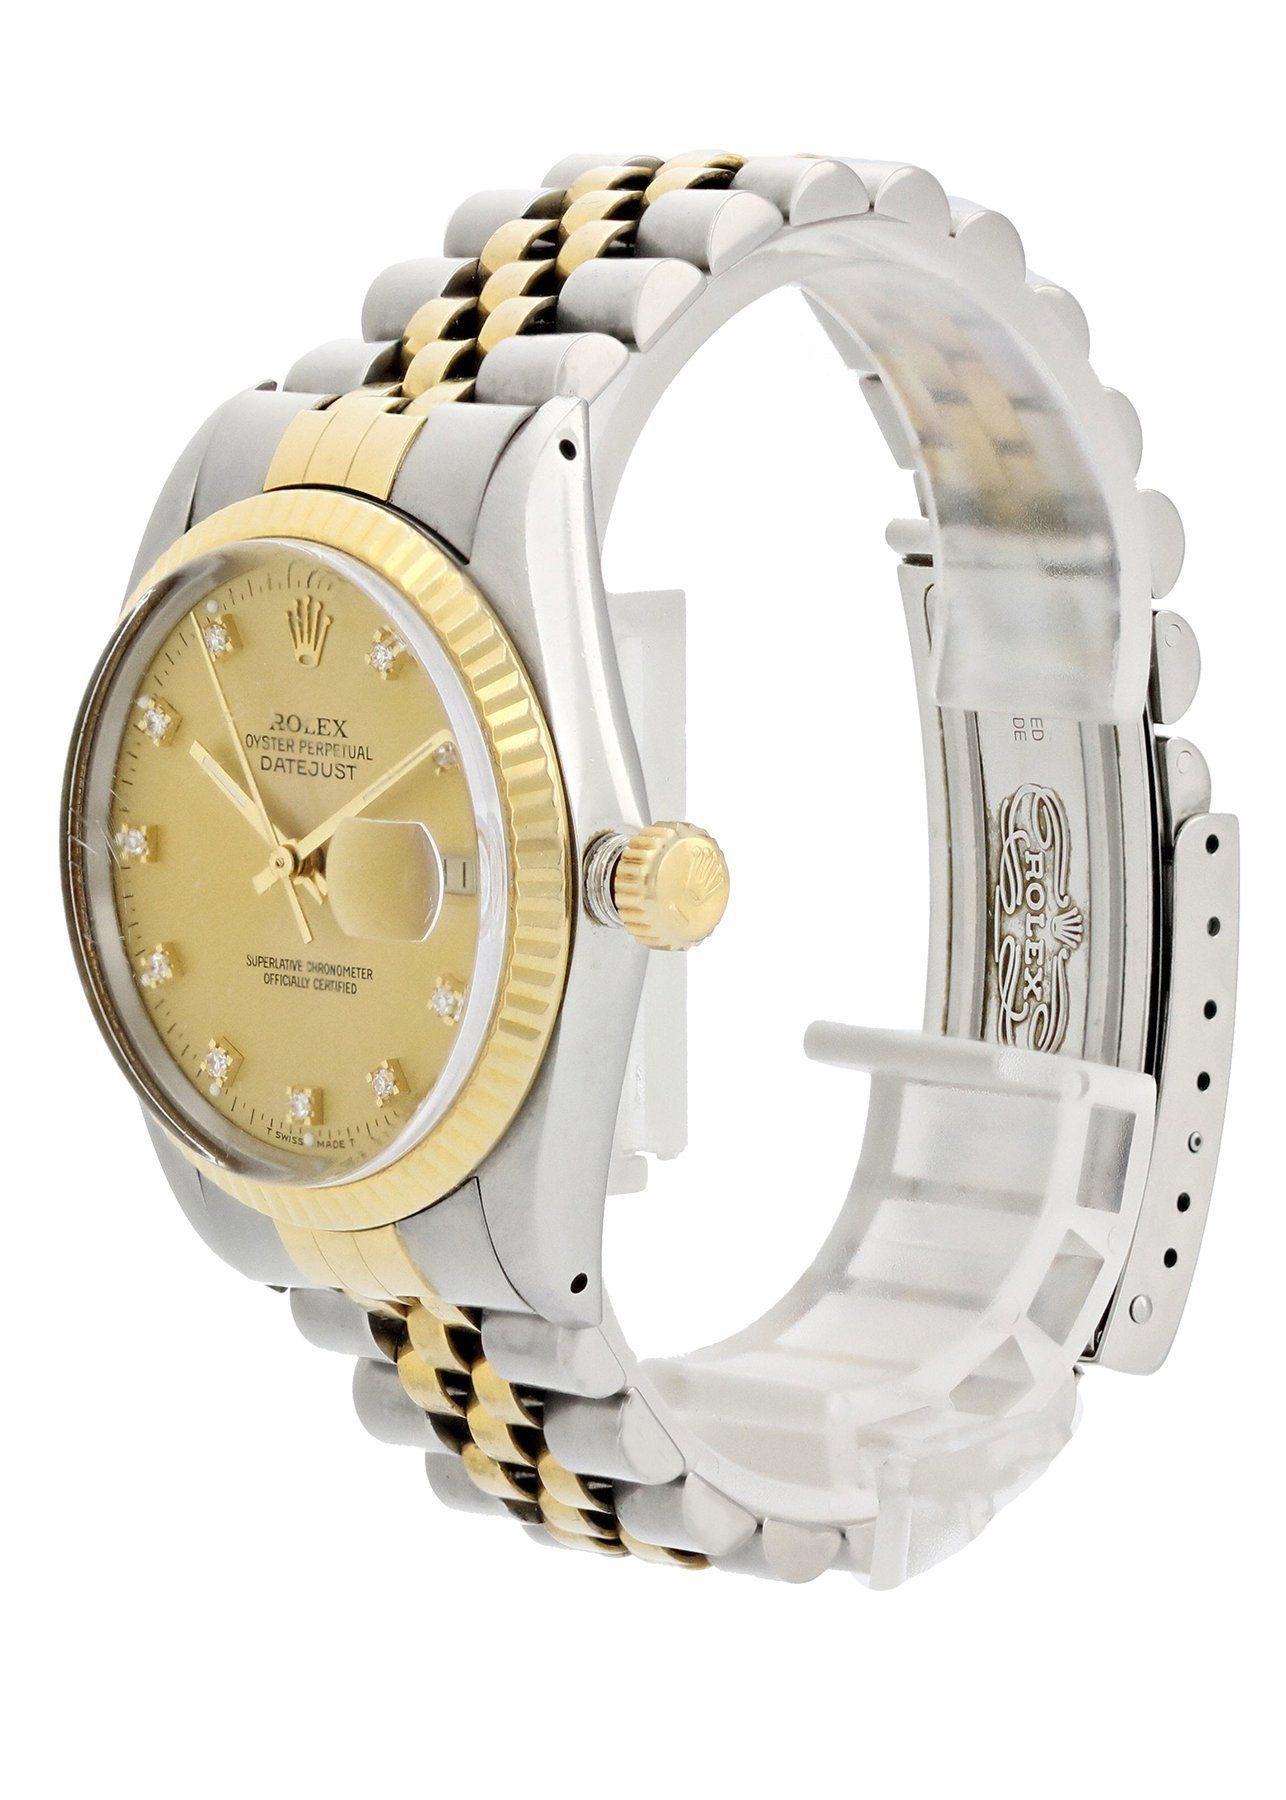 Rolex Oyster Perpetual Datejust 16013 Men's Watch. 
Stainless steel 36mm case with an 18k yellow gold fluted bezel. 
Champagne dial with gold hands and factory set diamond hour markers. 
Quickset date display at 3 o'clock position. 
Two-tone Jubilee